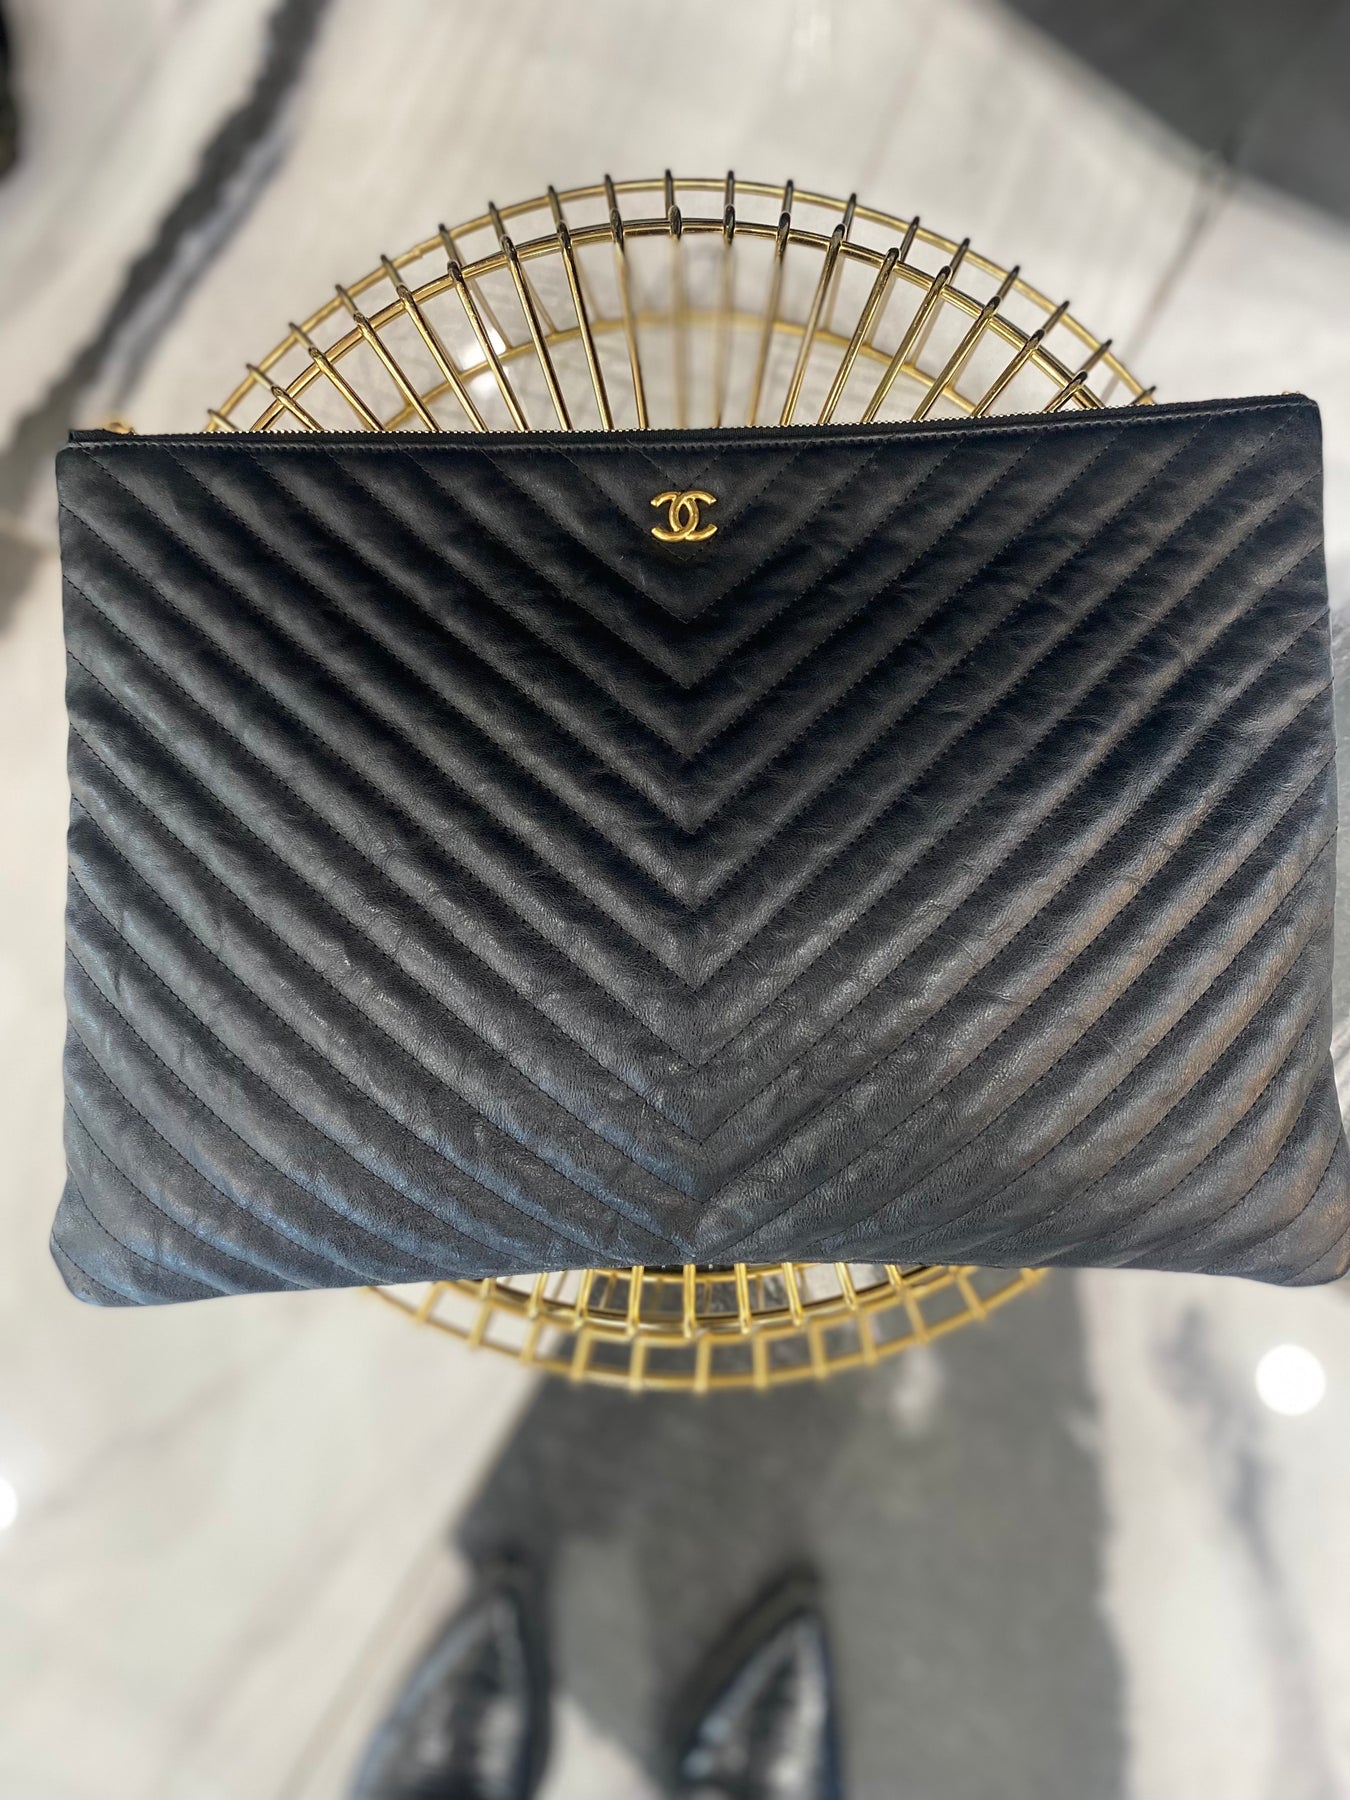 Black Chevron Flap Bag in Quilted Lambskin Leather with Gold tone Hardware,  2014, Handbags & Accessories, 2021